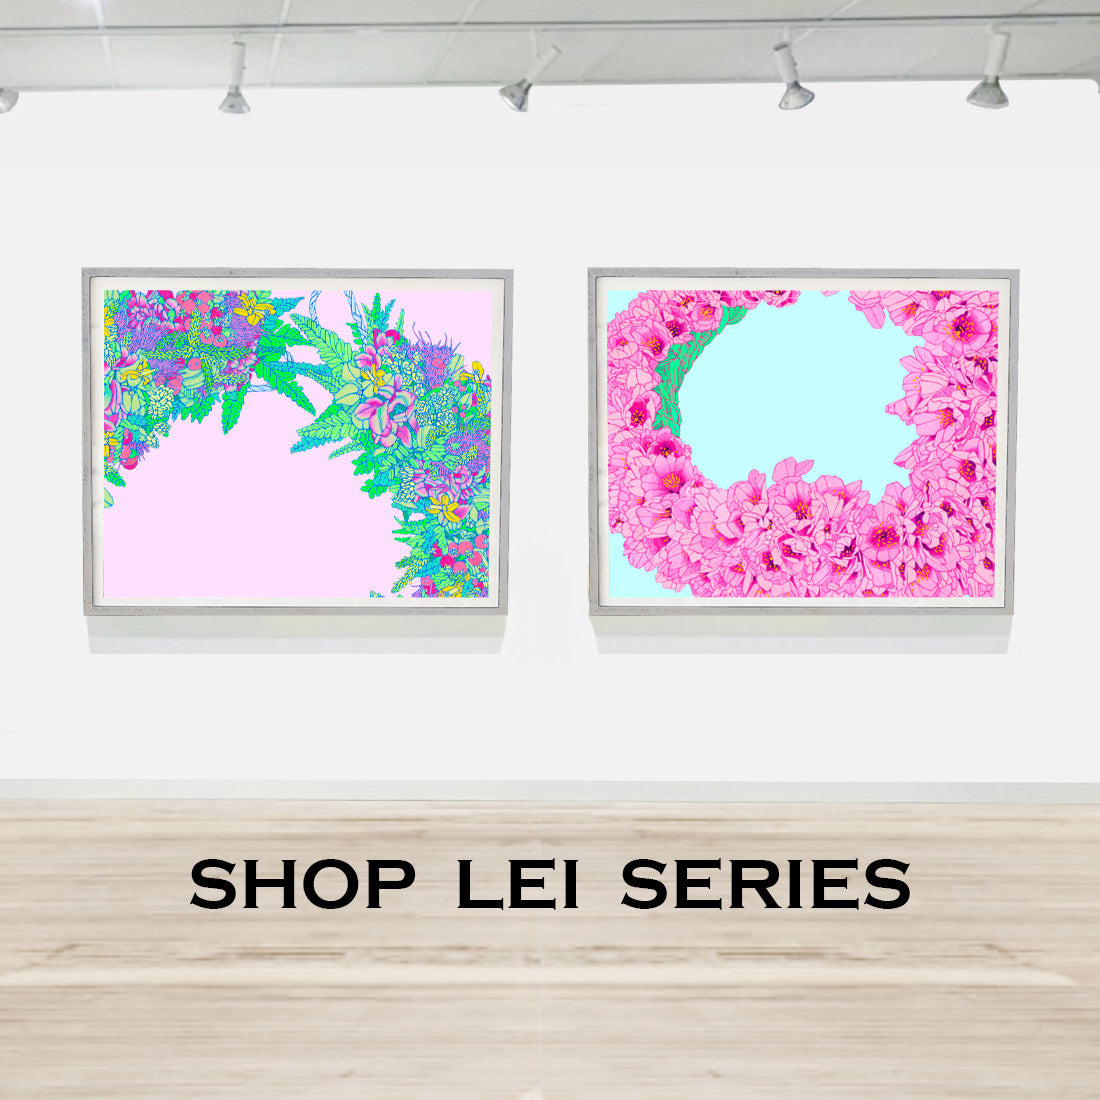 Judd Boloker Lei Hawaii Art Prints – Made in Hawaii - This portfolio of Drawings of Hawaii features Lei Flowers by the Oahu Visual Artist.  